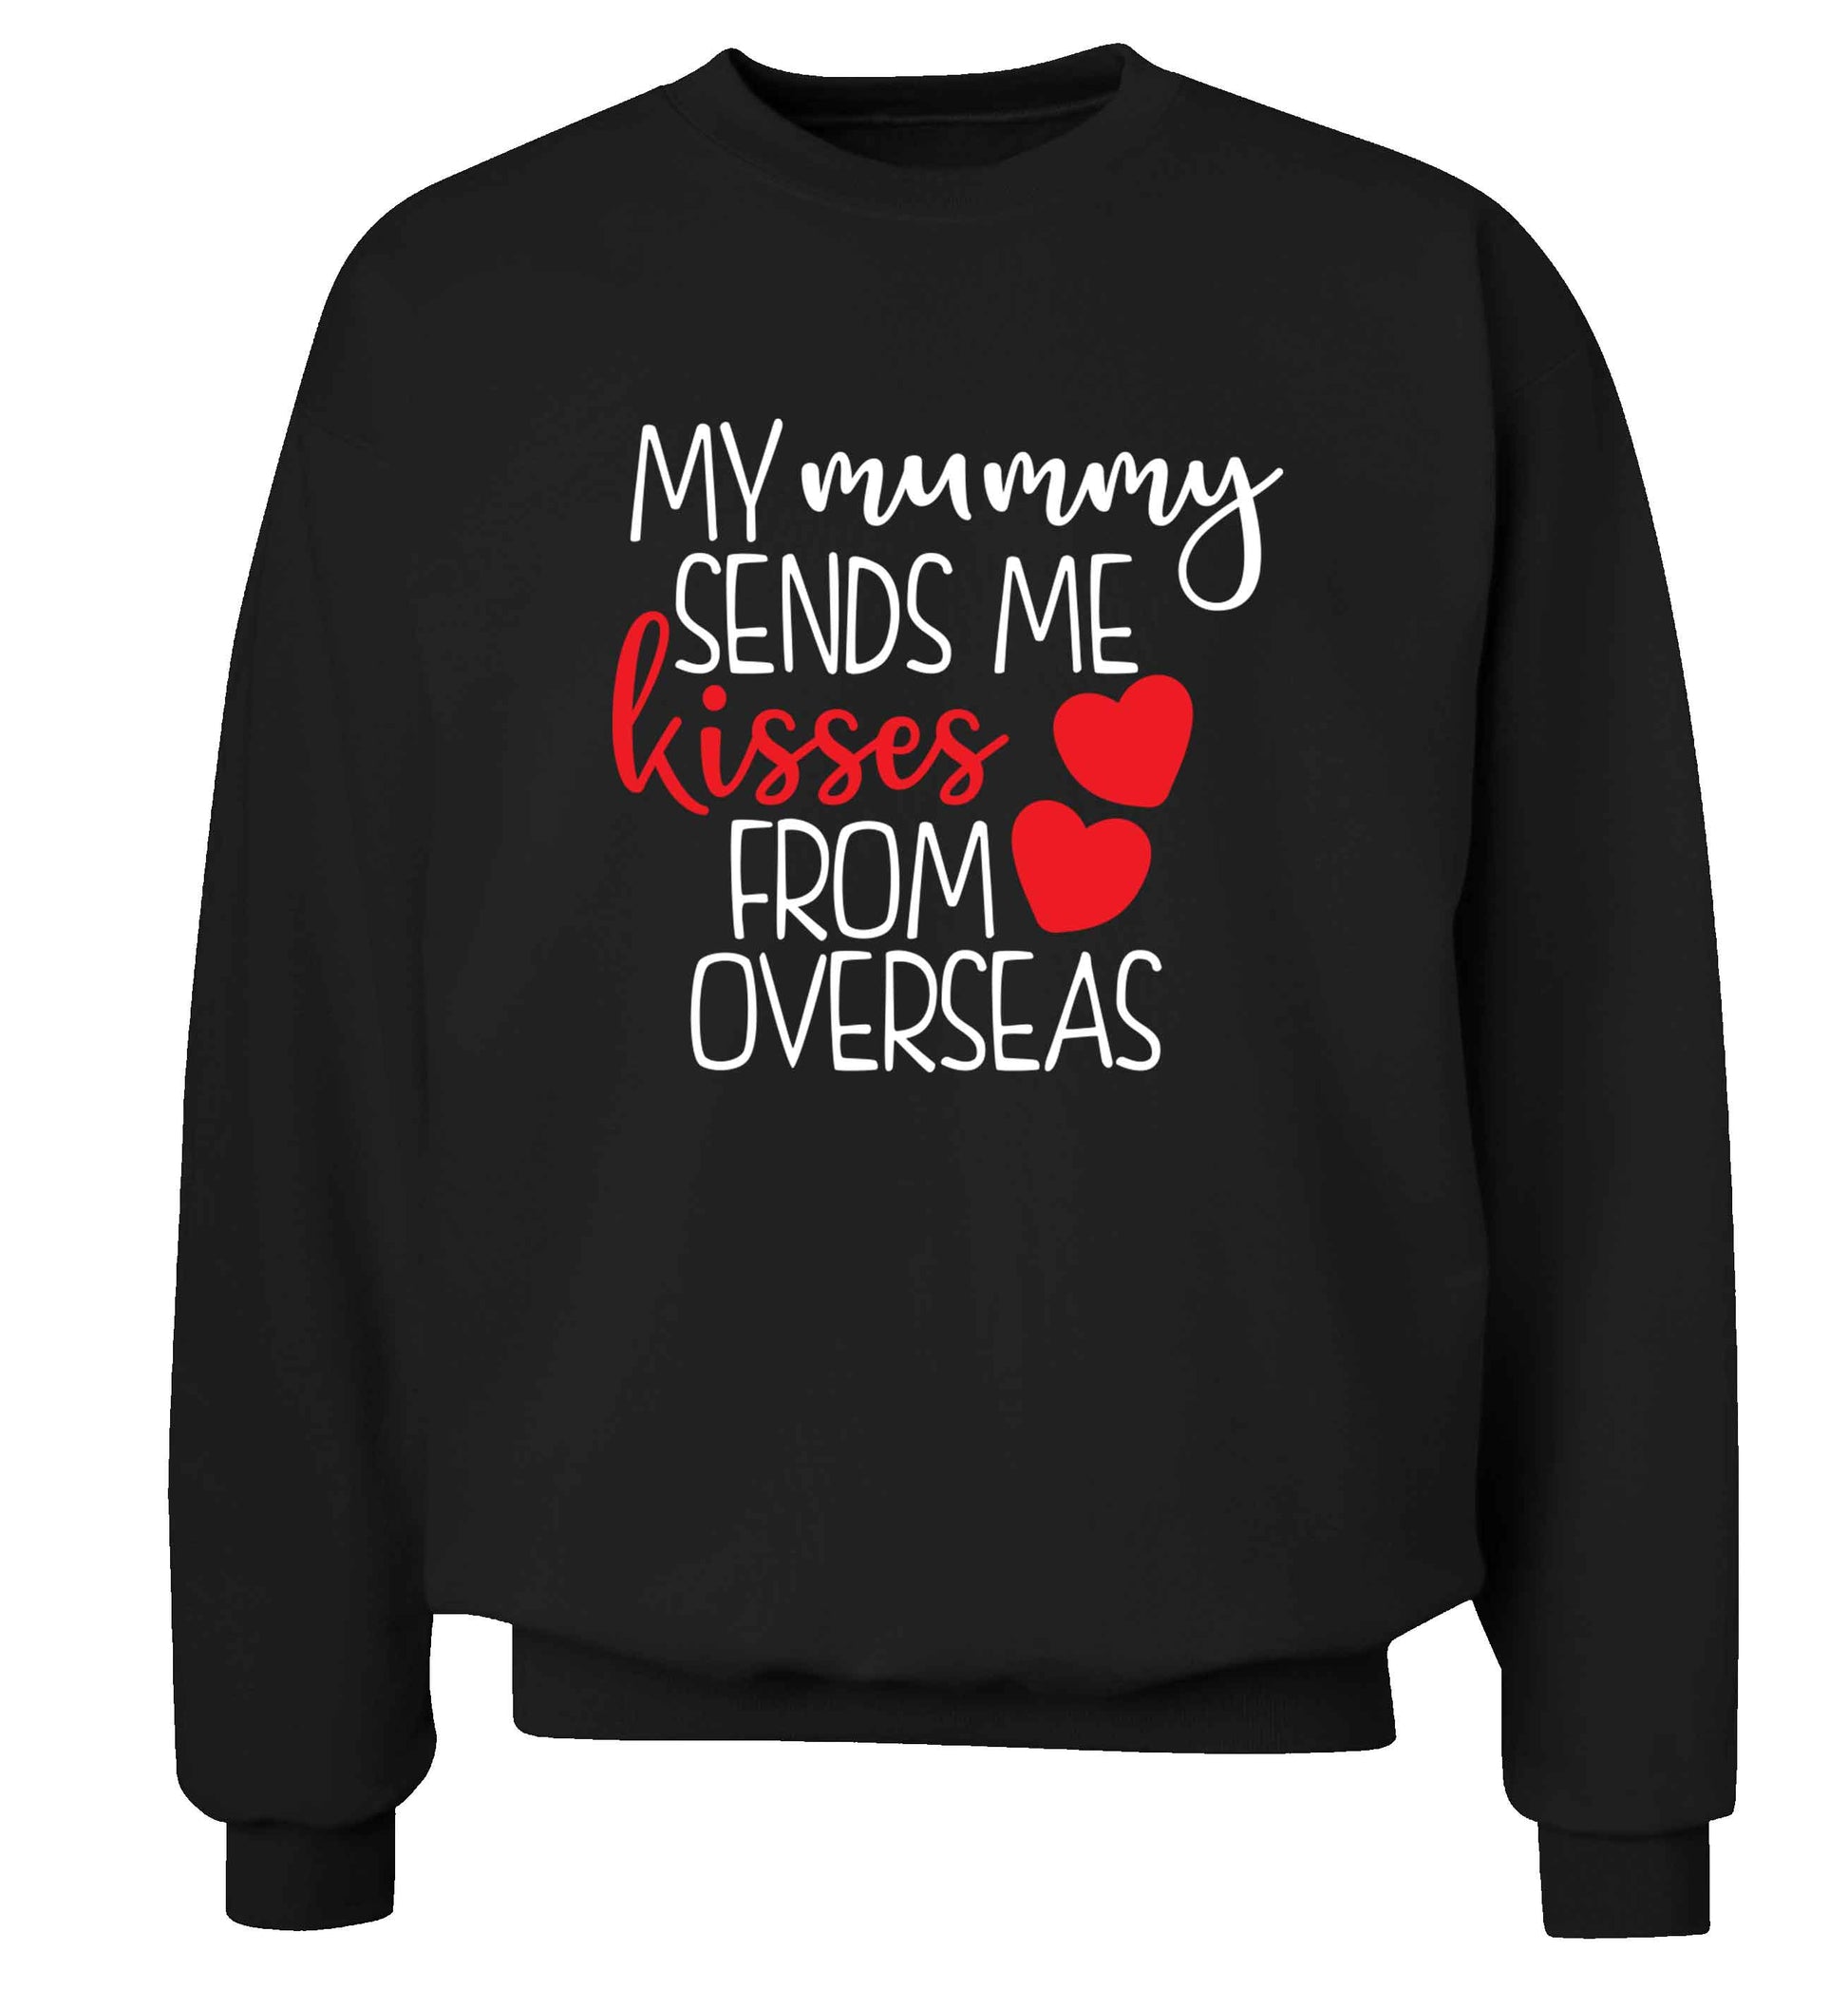 My mummy sends me kisses from overseas adult's unisex black sweater 2XL